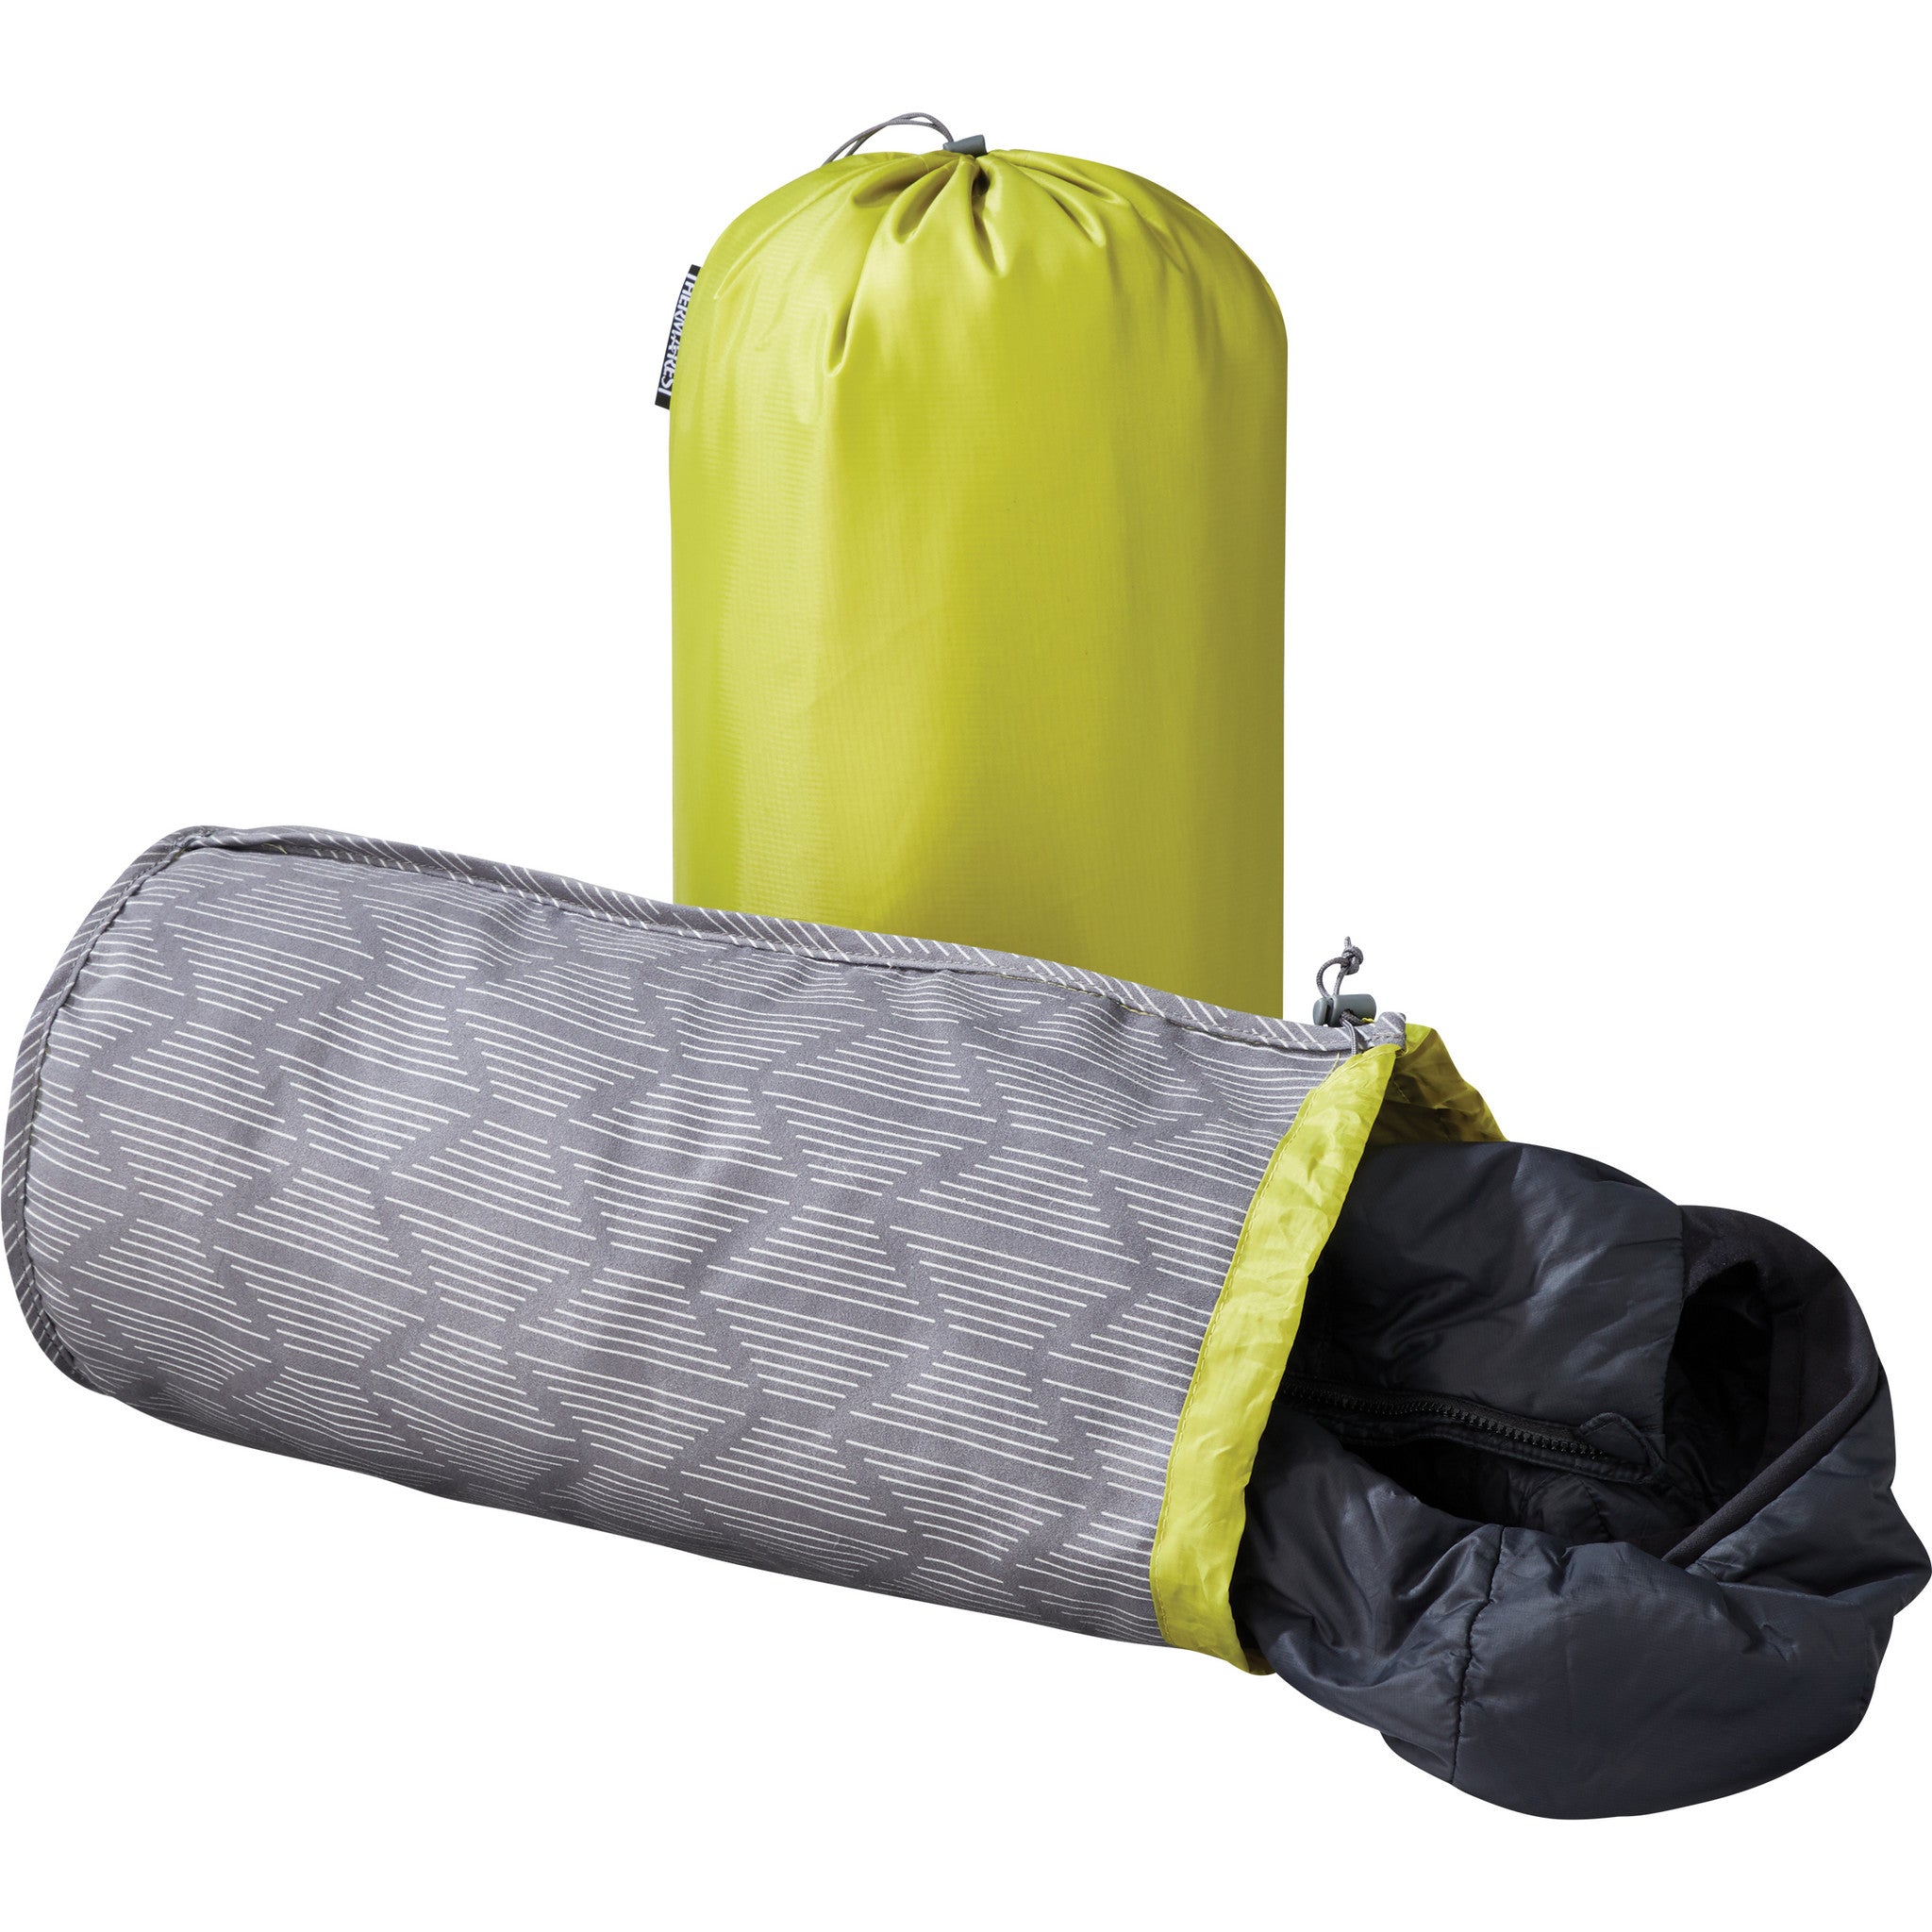 Thermarest - Stuff Sack Pillow Case